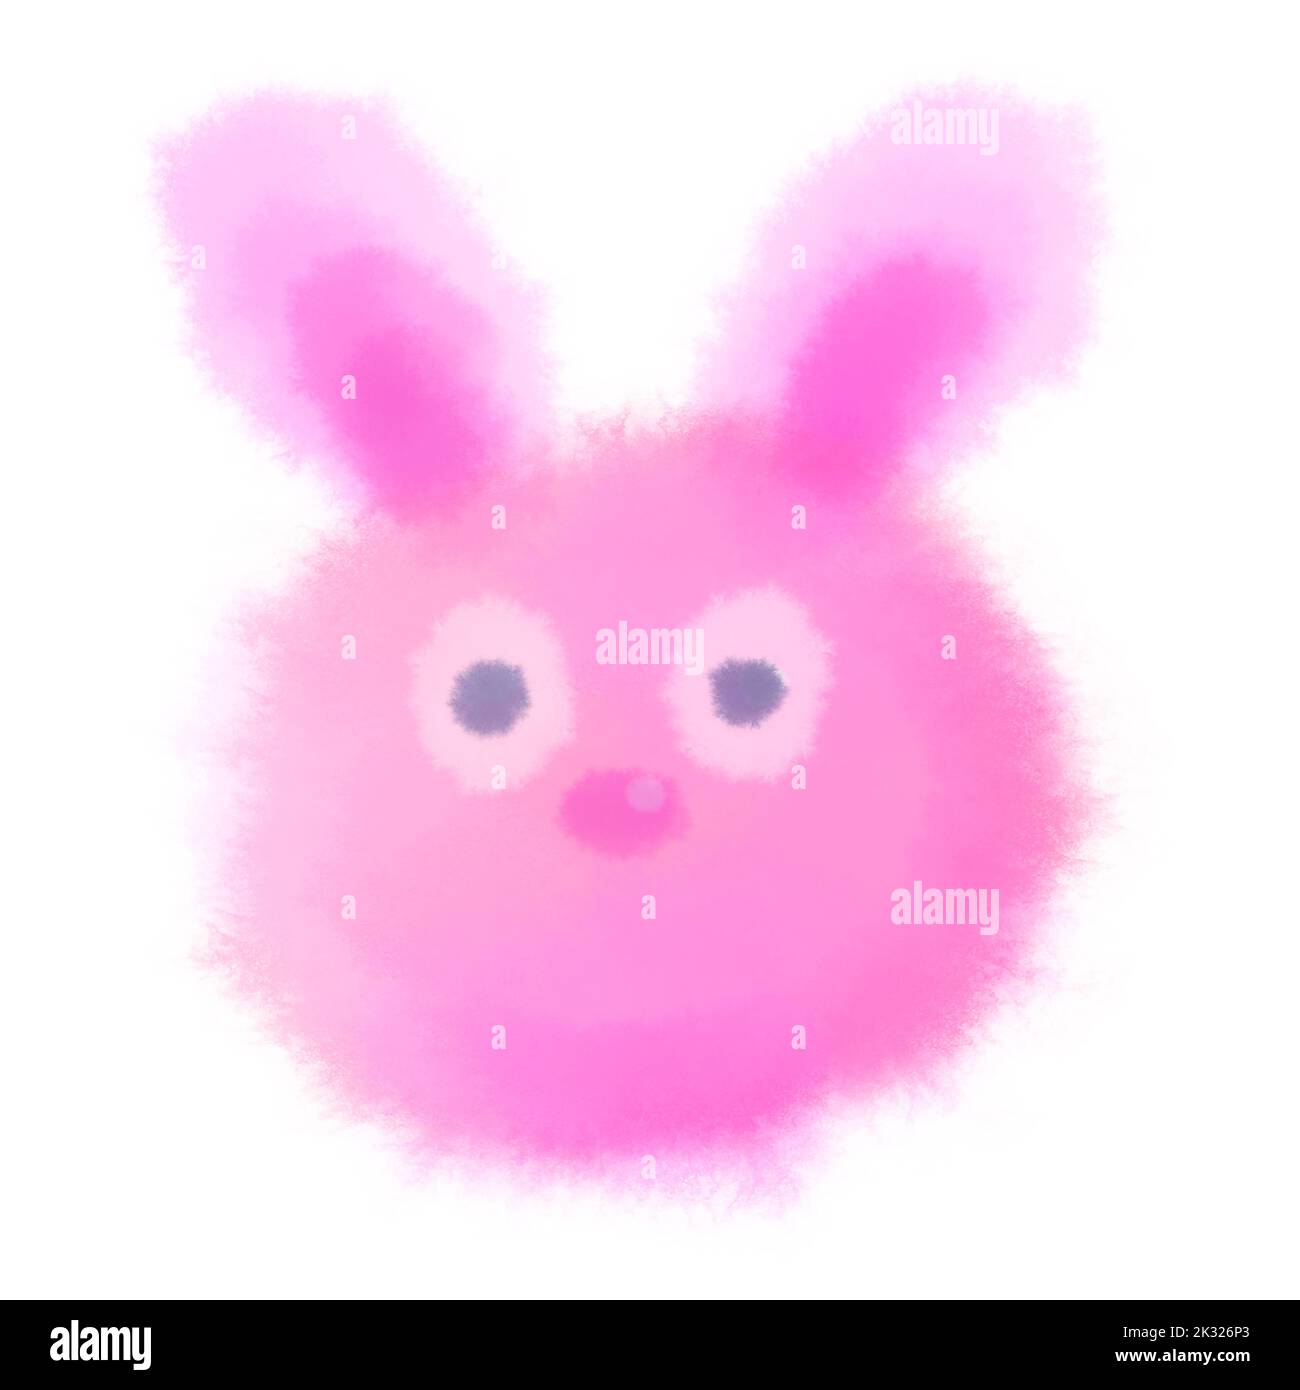 Isolated cute fluffy pink rabbit on white background, hand-drawn a character of fluffy pink rabbit. Stock Photo